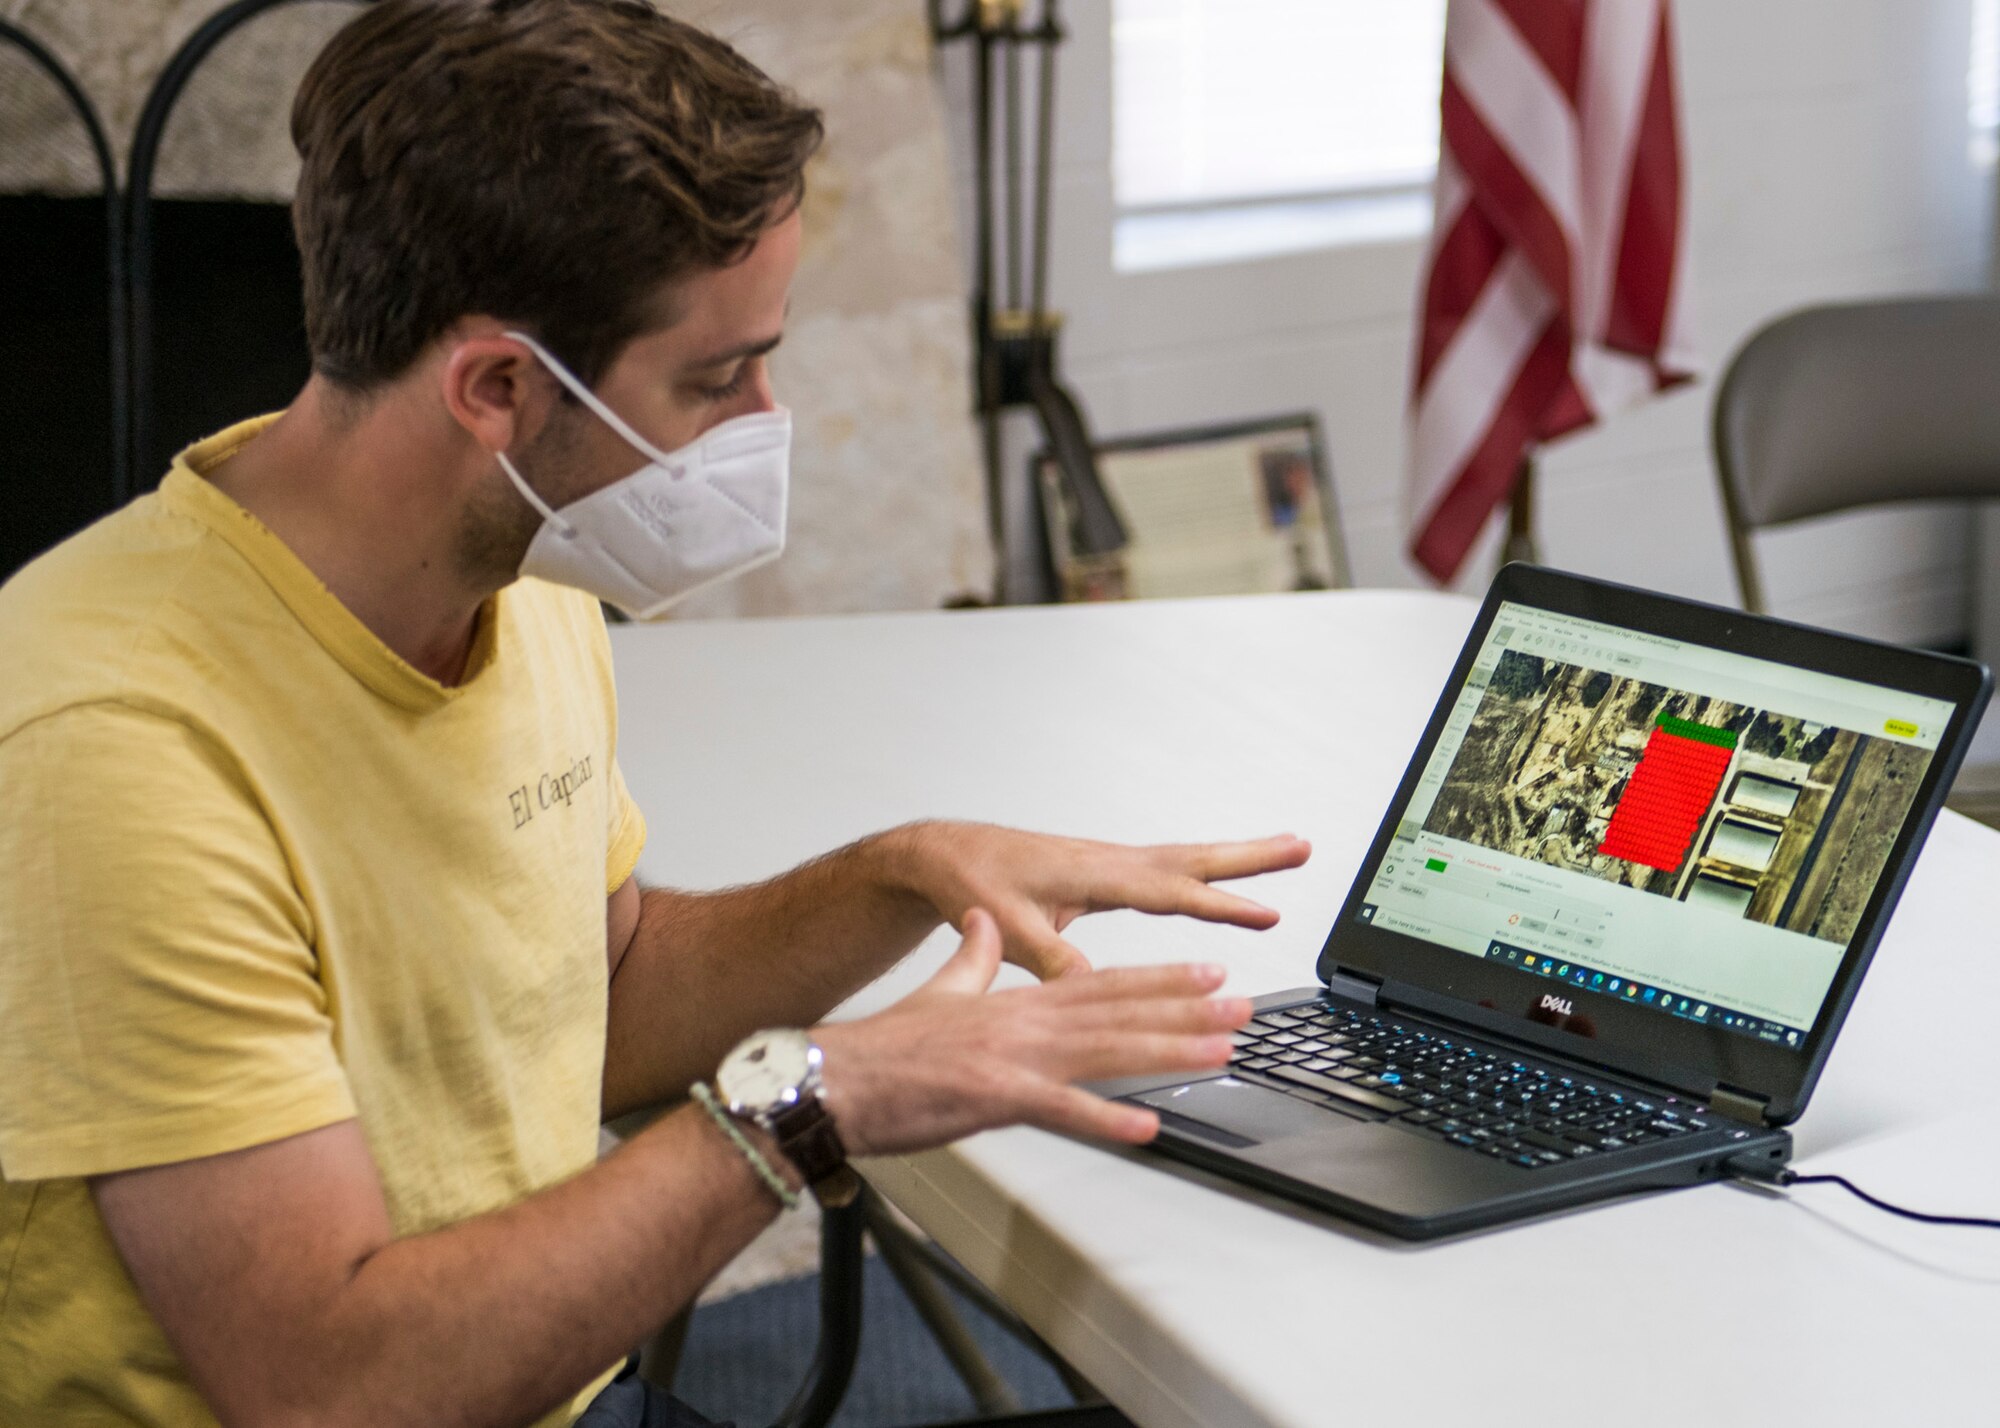 Student creates 3D mapping during training